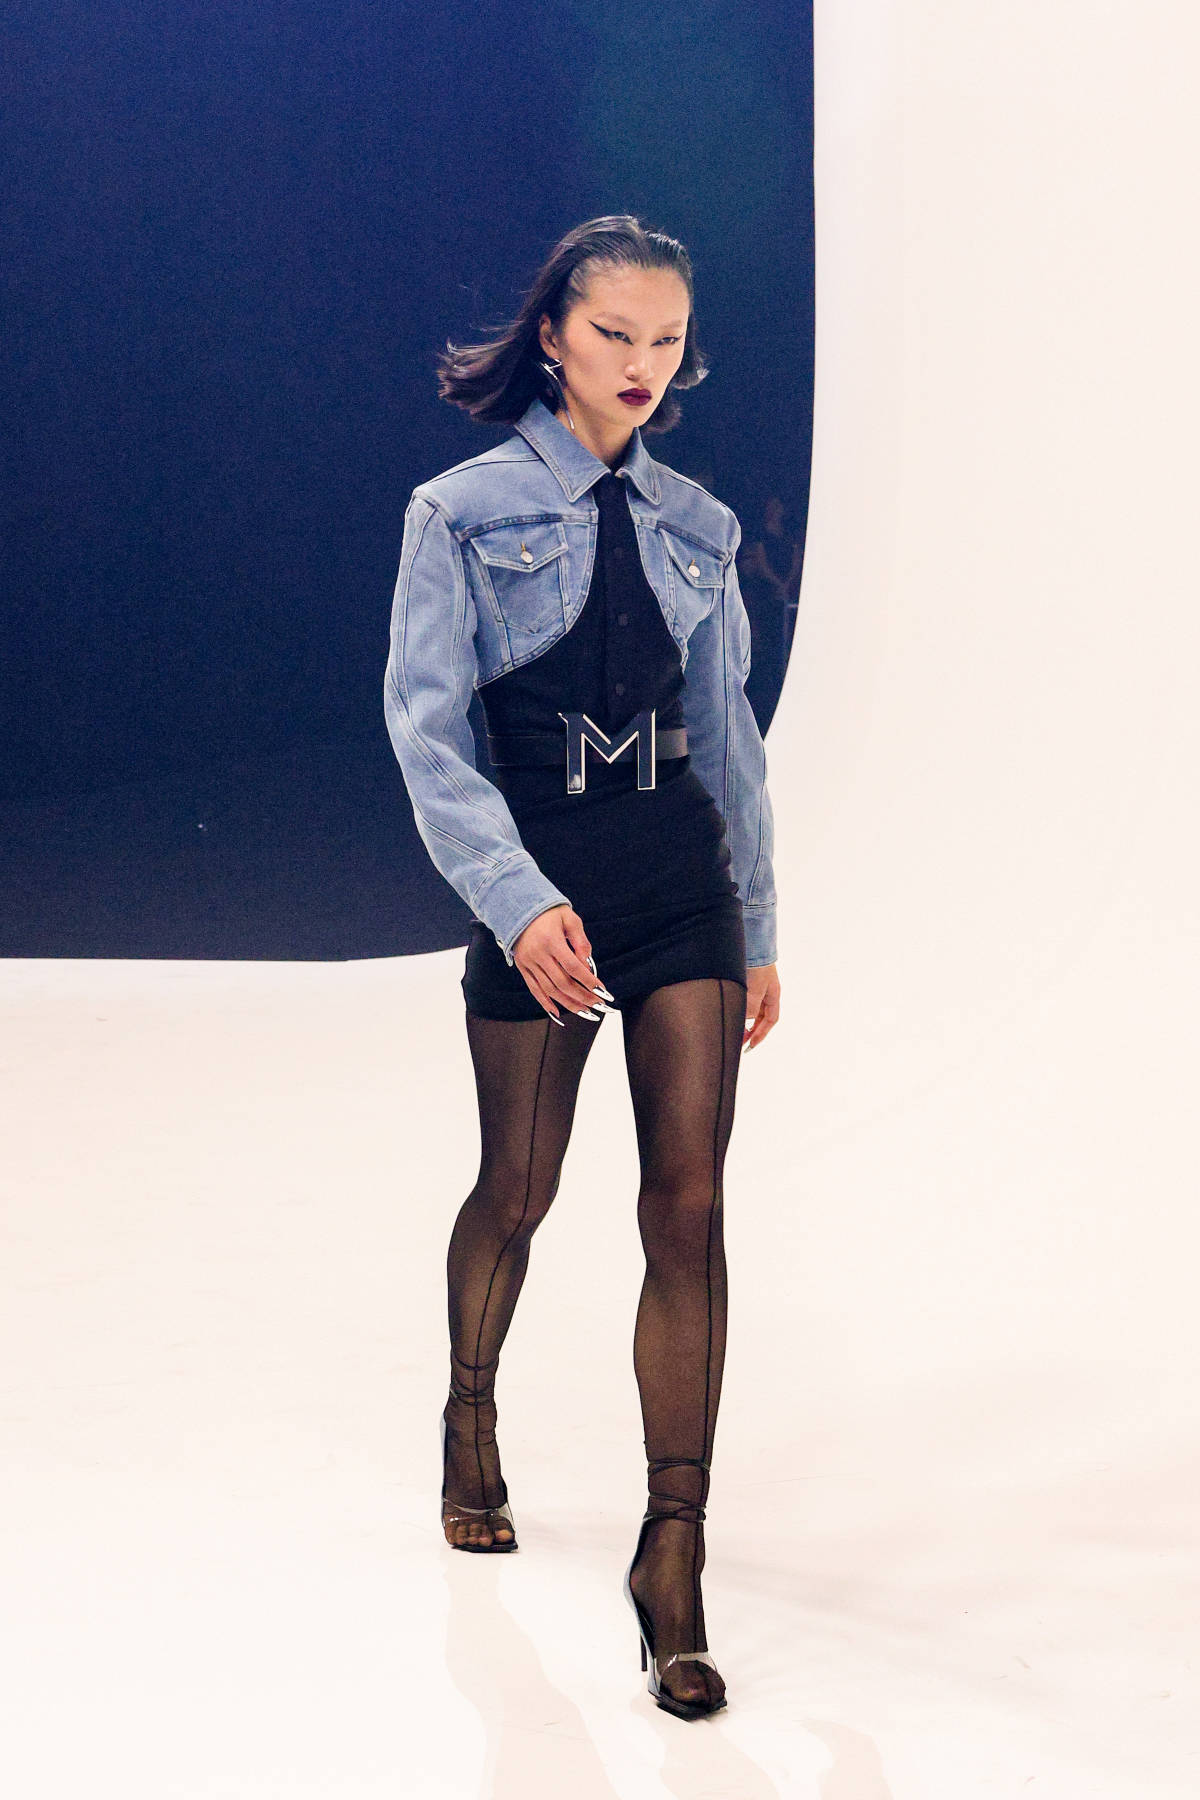 H&M Teases Upcoming Mugler Collab Packed with Sexy Throwback Denim